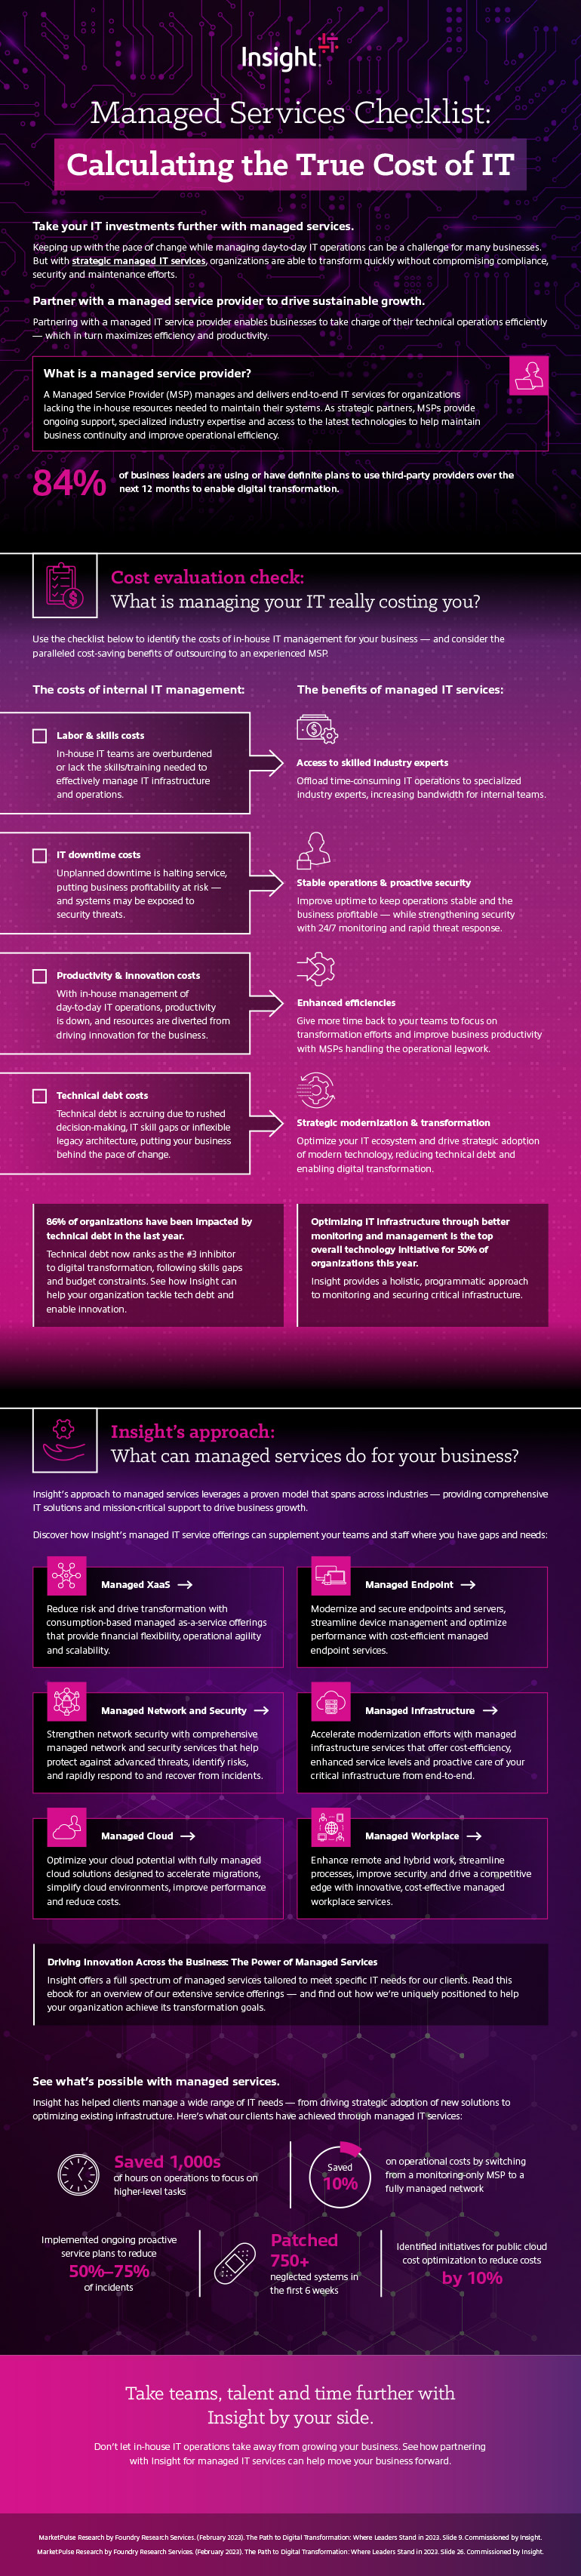 Managed Services Checklist: Calculating the True Cost of IT infographic.